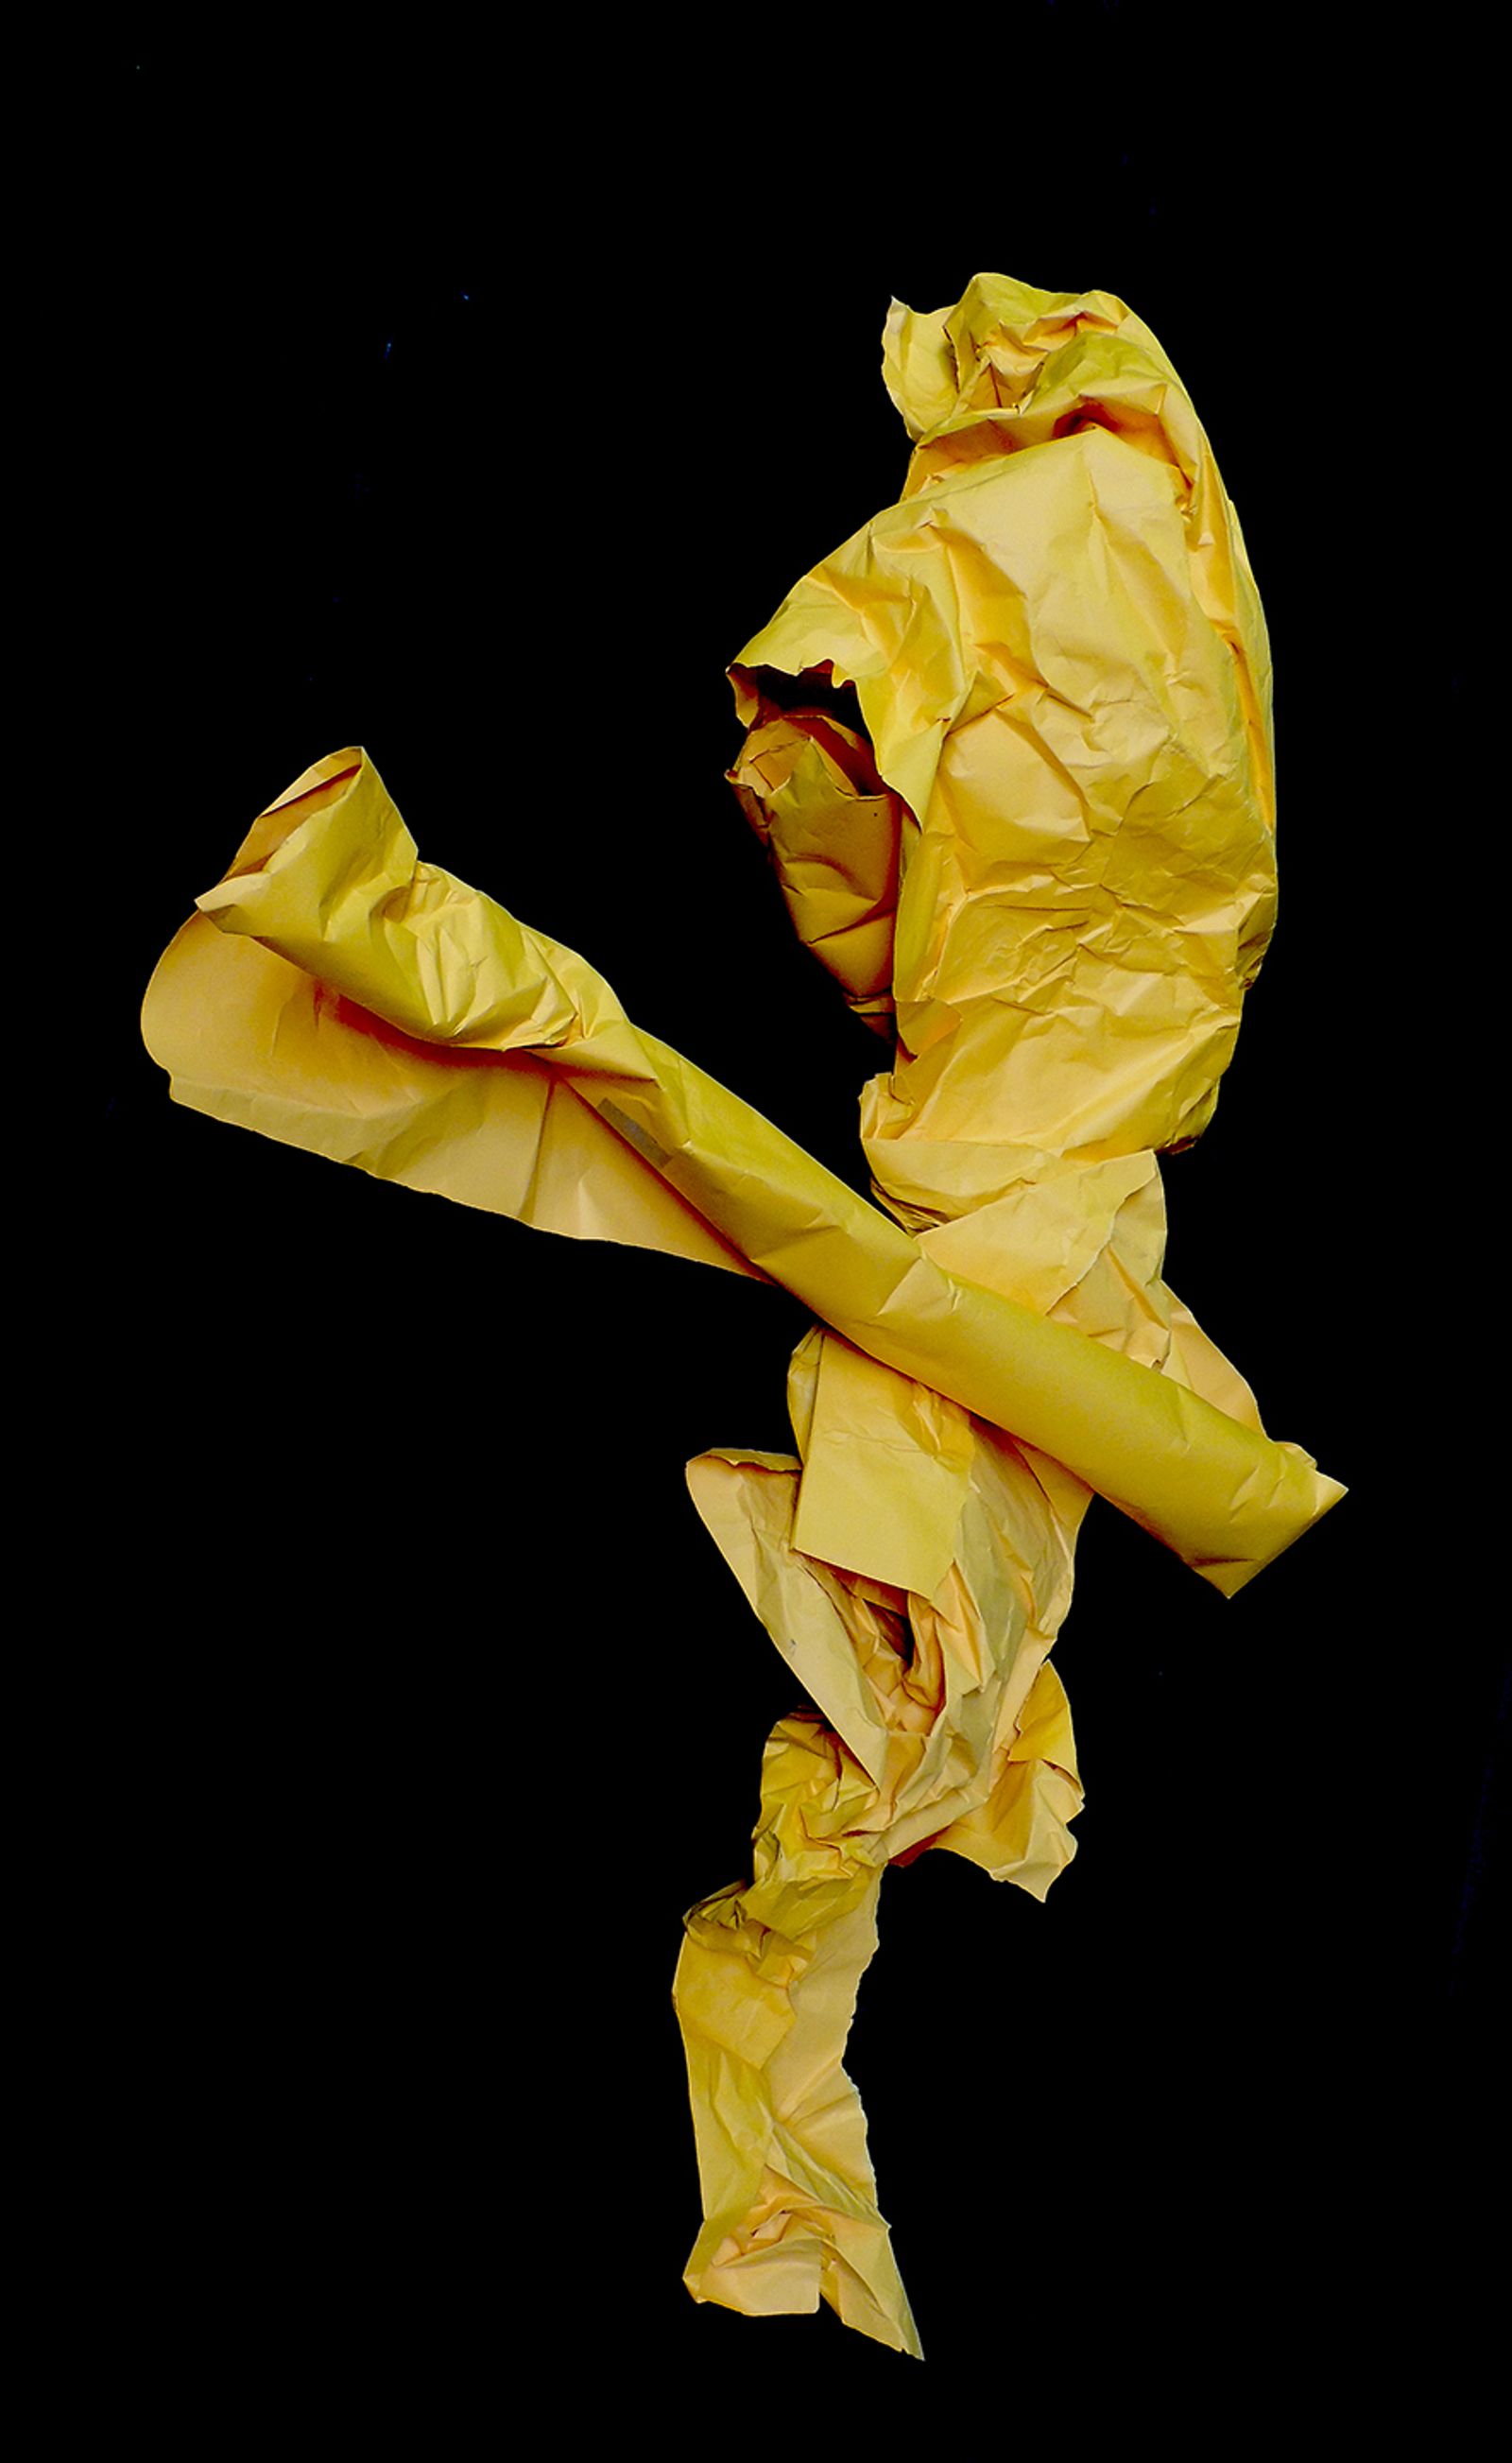 © Frederic Crist - Image from the Yellow and Red Paper Performances photography project